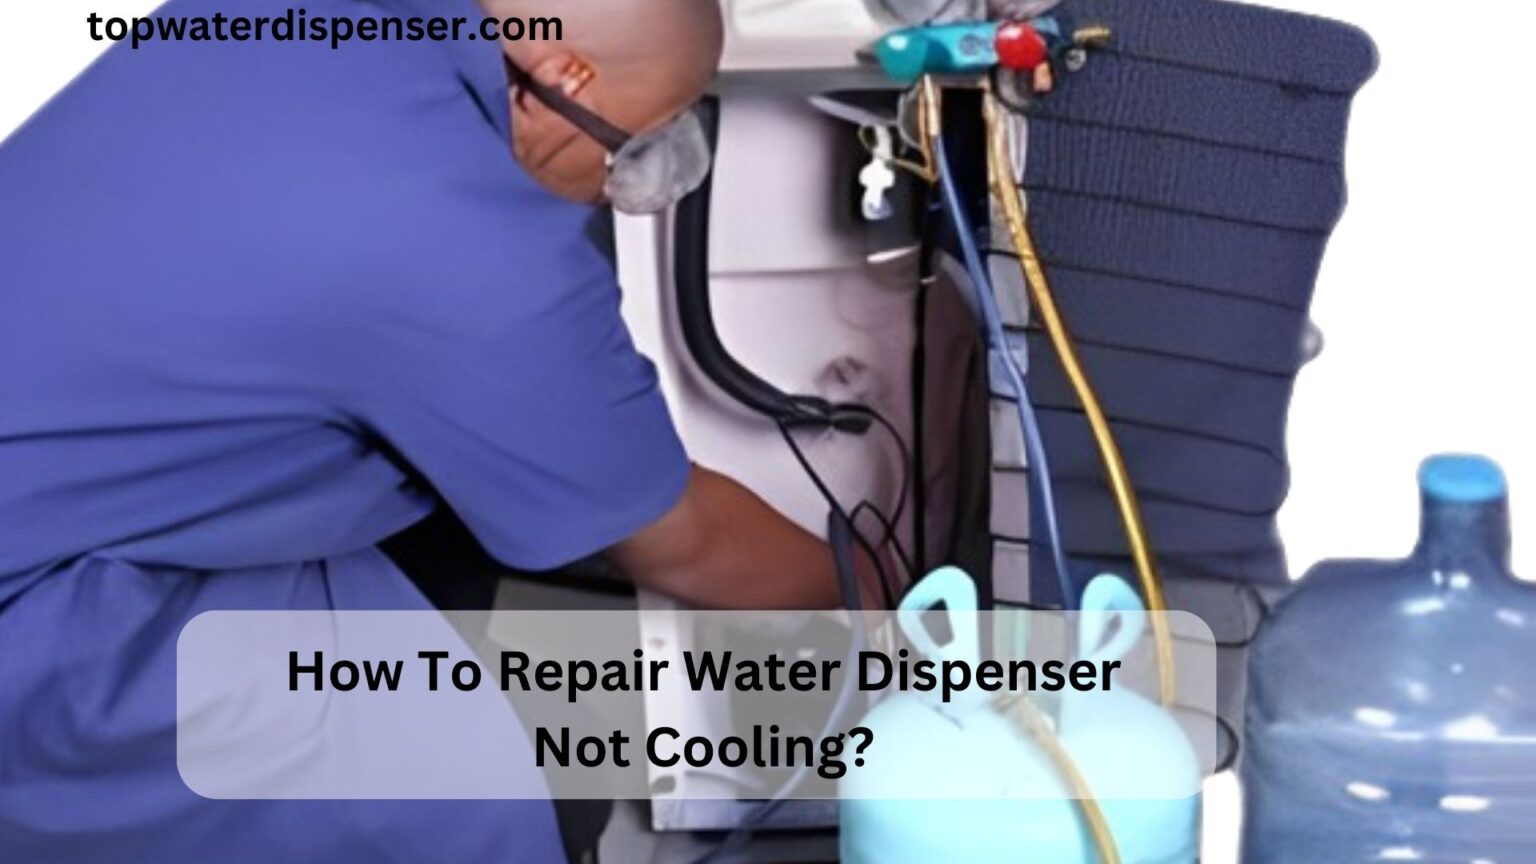 How To Repair Water Dispenser Not Cooling?